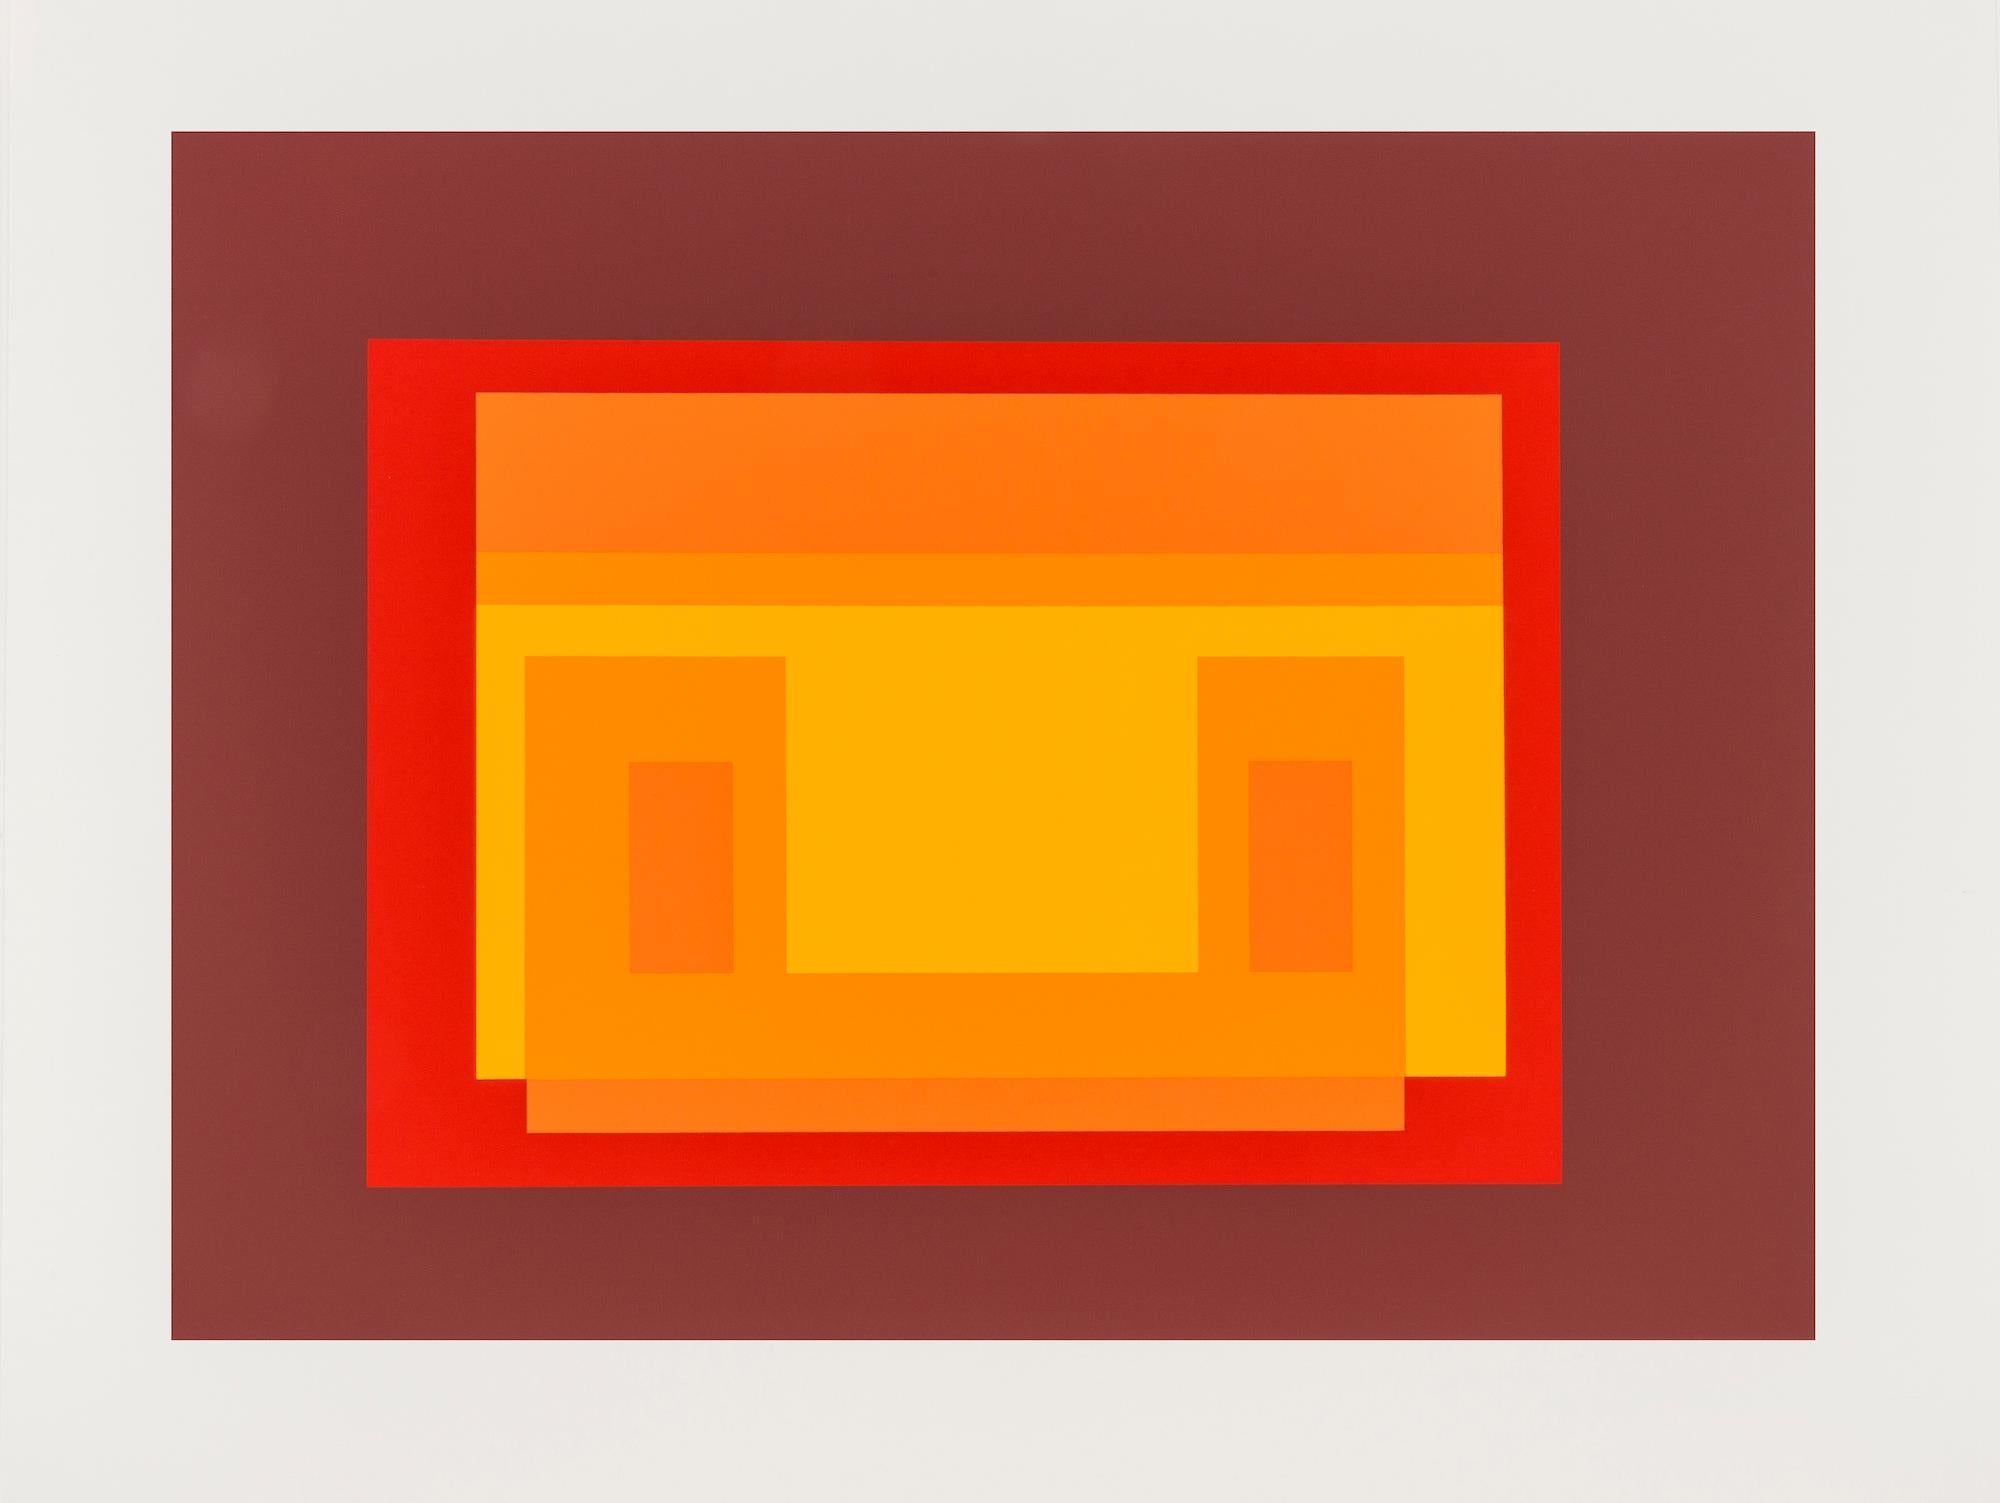 Formulation: Articulation I & II -- Colour Theory, Minimalism by Josef Albers 4